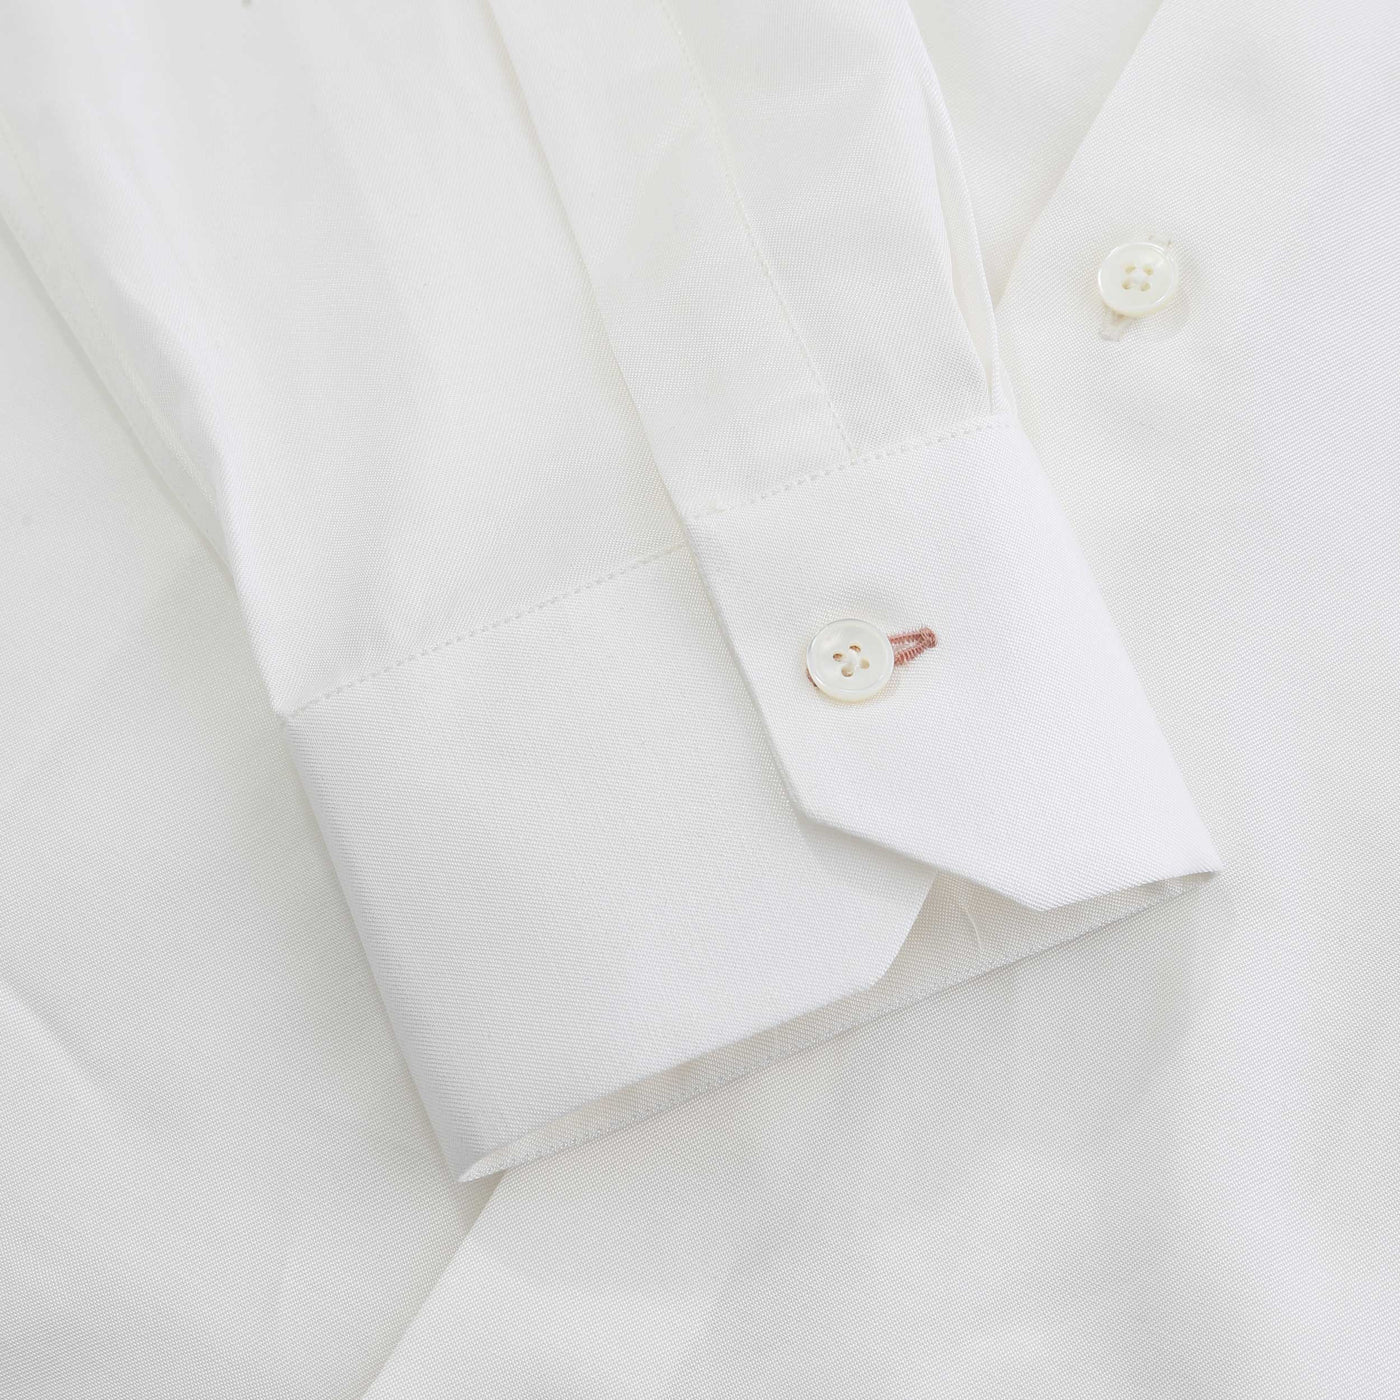 Paul Smith Slim Fit Shirt in Ivory Cuff